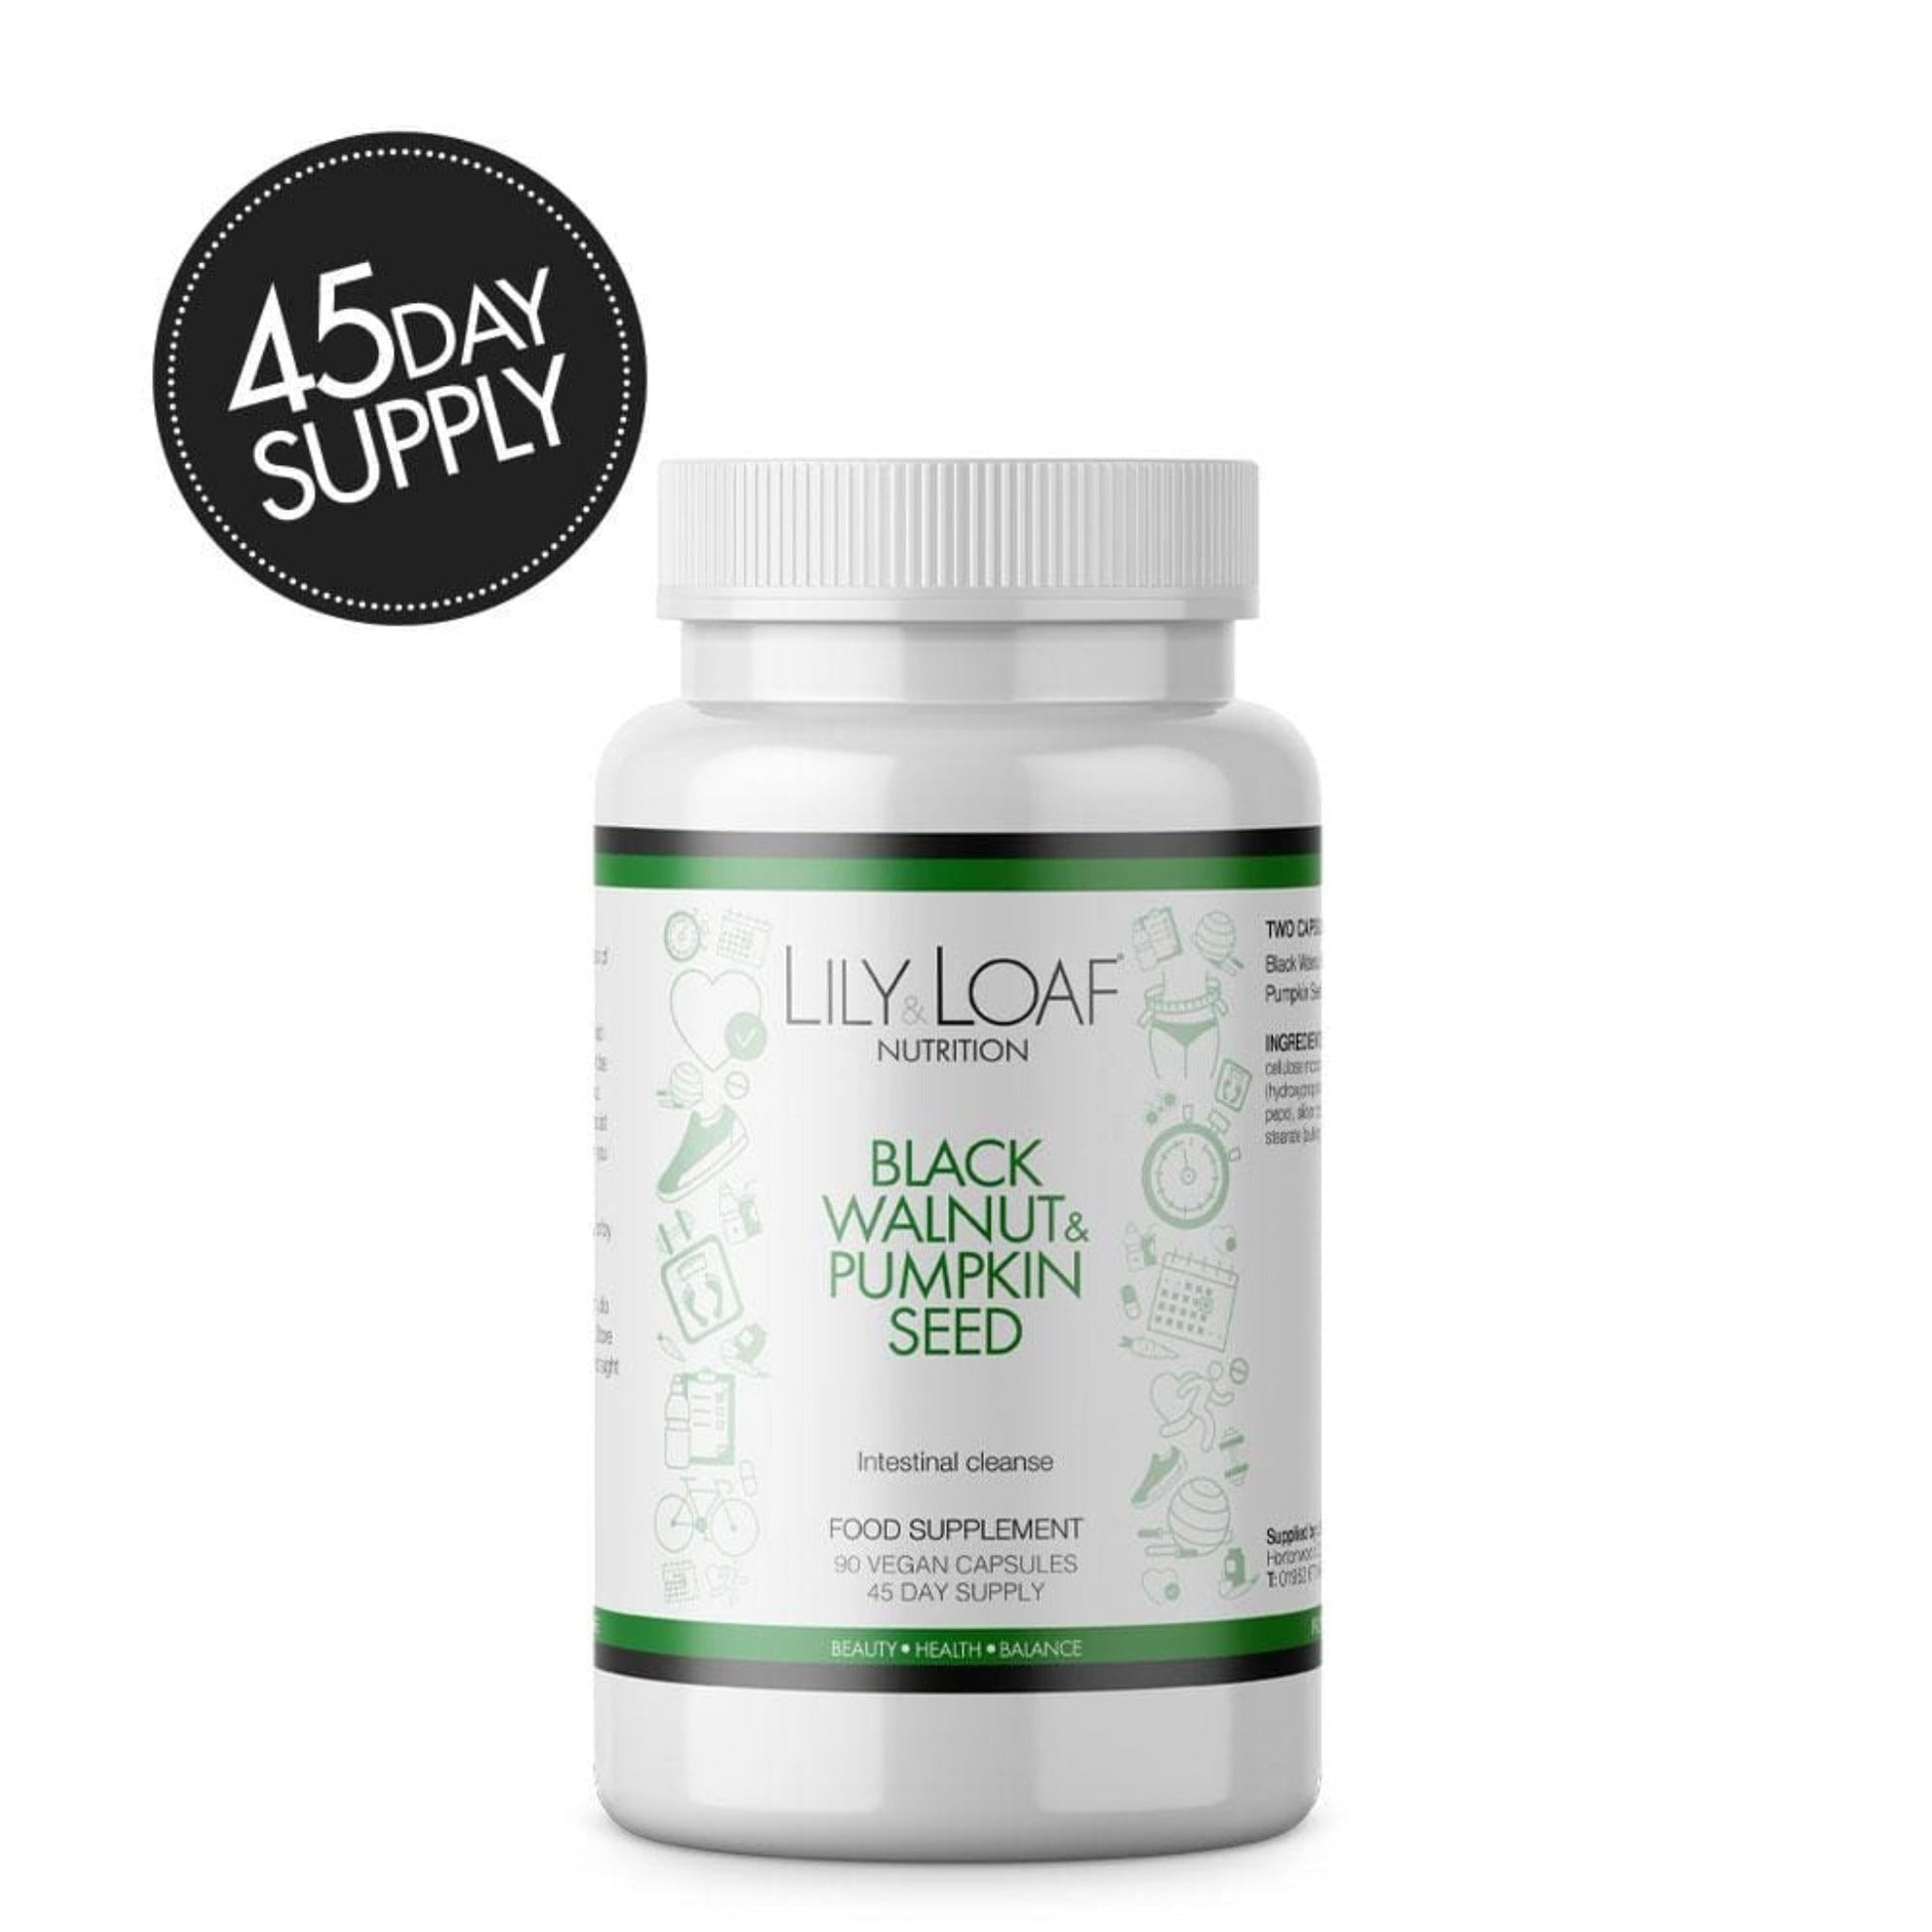 Lily & Loaf Black Walnut & Pumpkin Seed Intestinal Cleanse is a 45 day supply